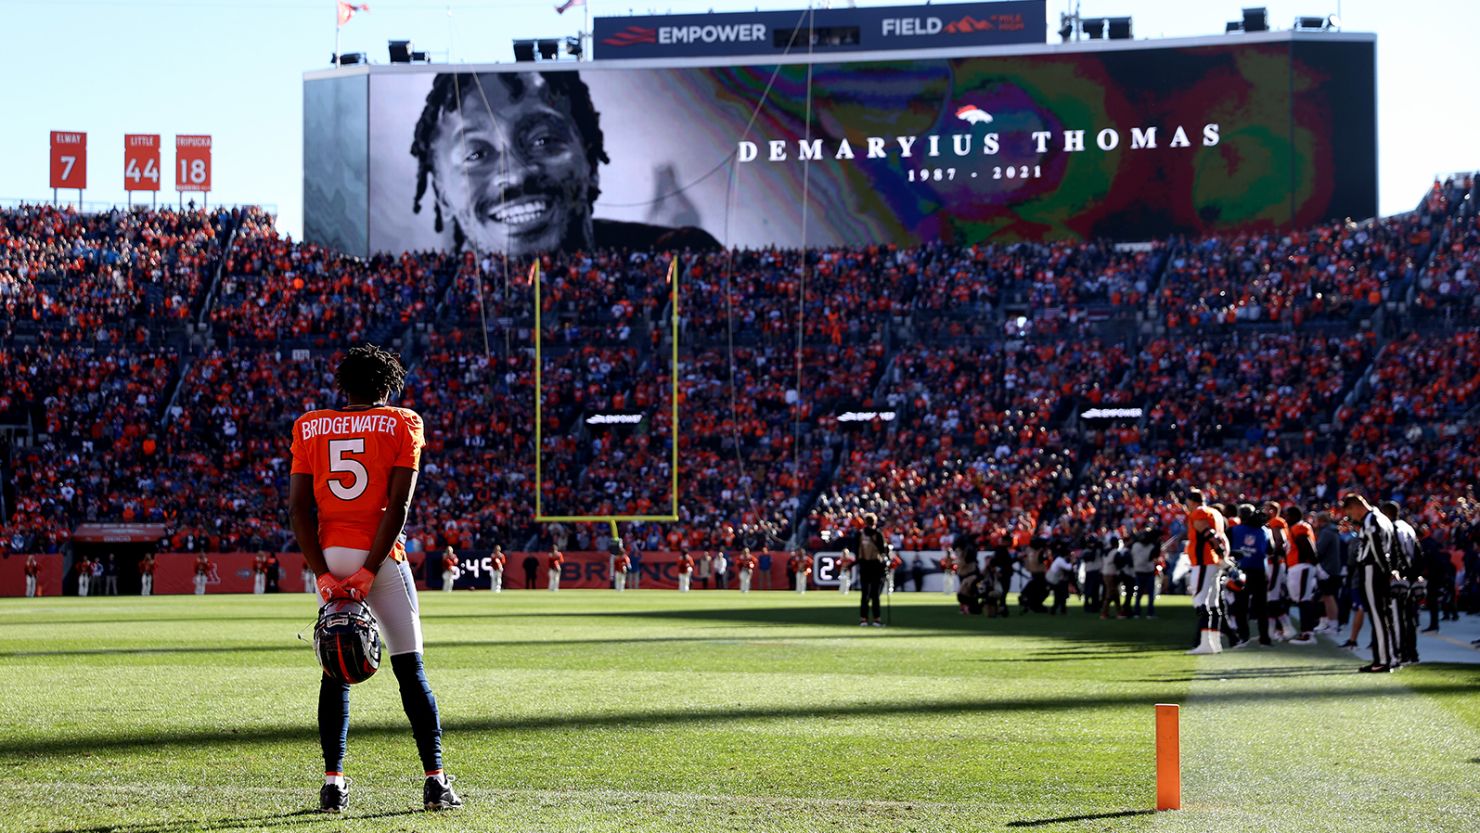 Teddy Bridgewater of the Denver Broncos looks on during the tribute to the late former Denver Broncos player Demaryius Thomas, on December 12, 2021 in Denver, Colorado.